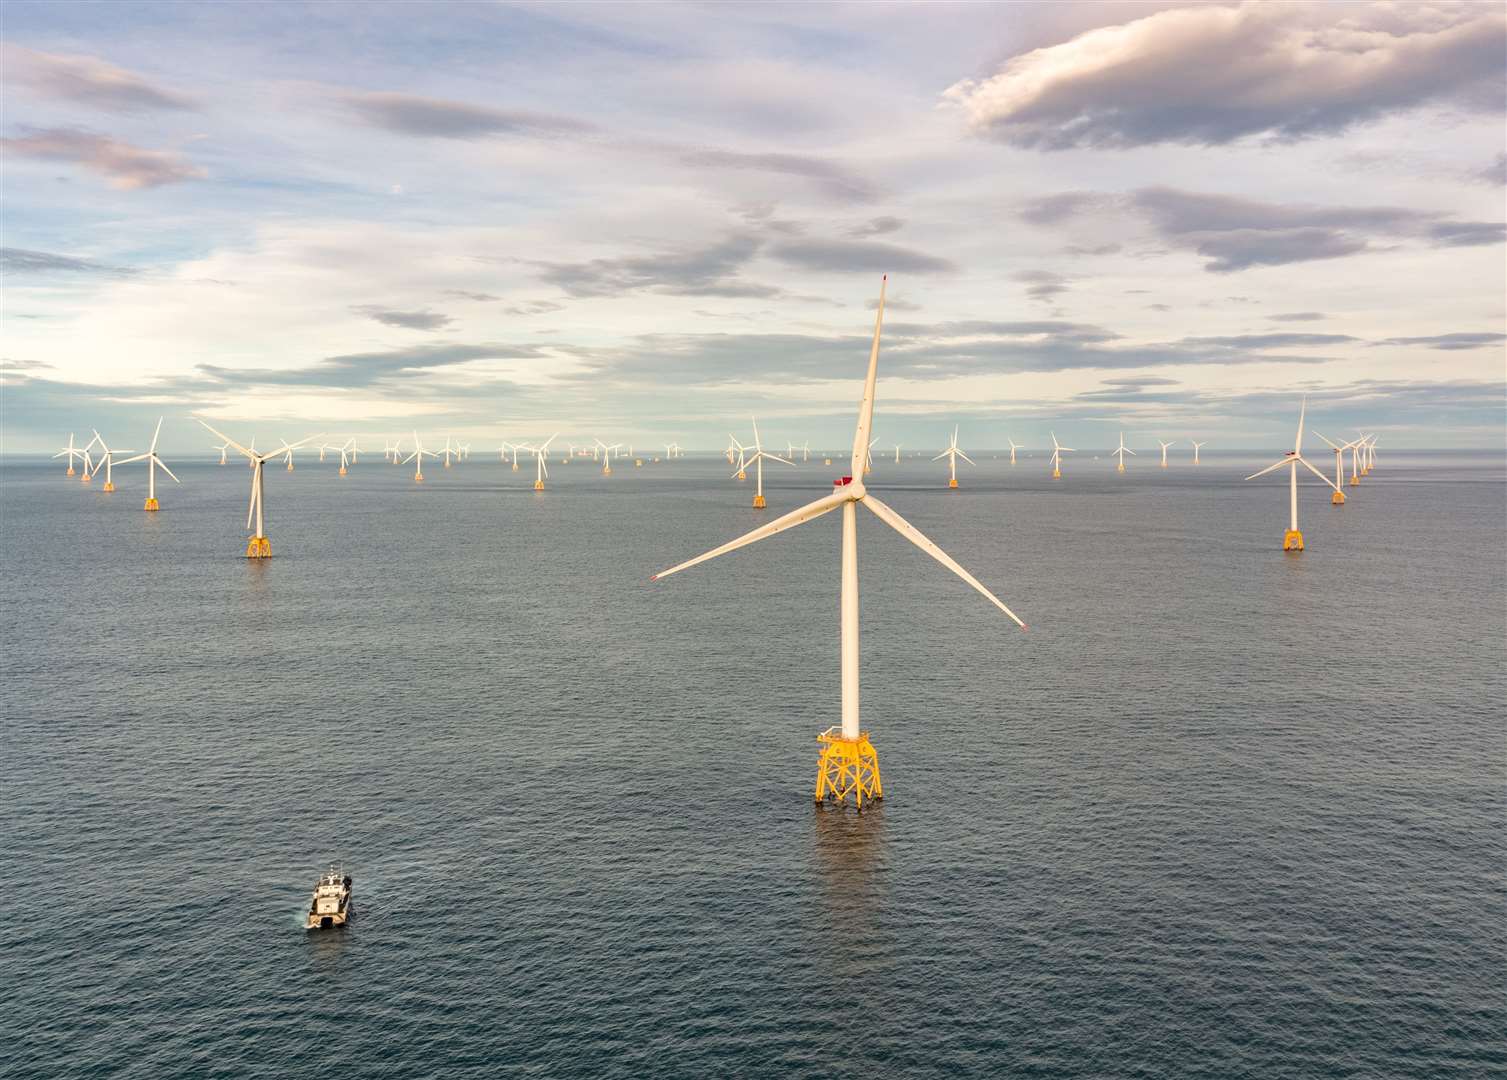 The ScotWind partnership of SSE Renewables, Marubeni and CIP has announced it will establish a £10 million education, research and community benefit fund should its ScotWind bids be successful in the upcoming Crown Estate Scotland seabed leasing round. Picture source: SSE Renewables